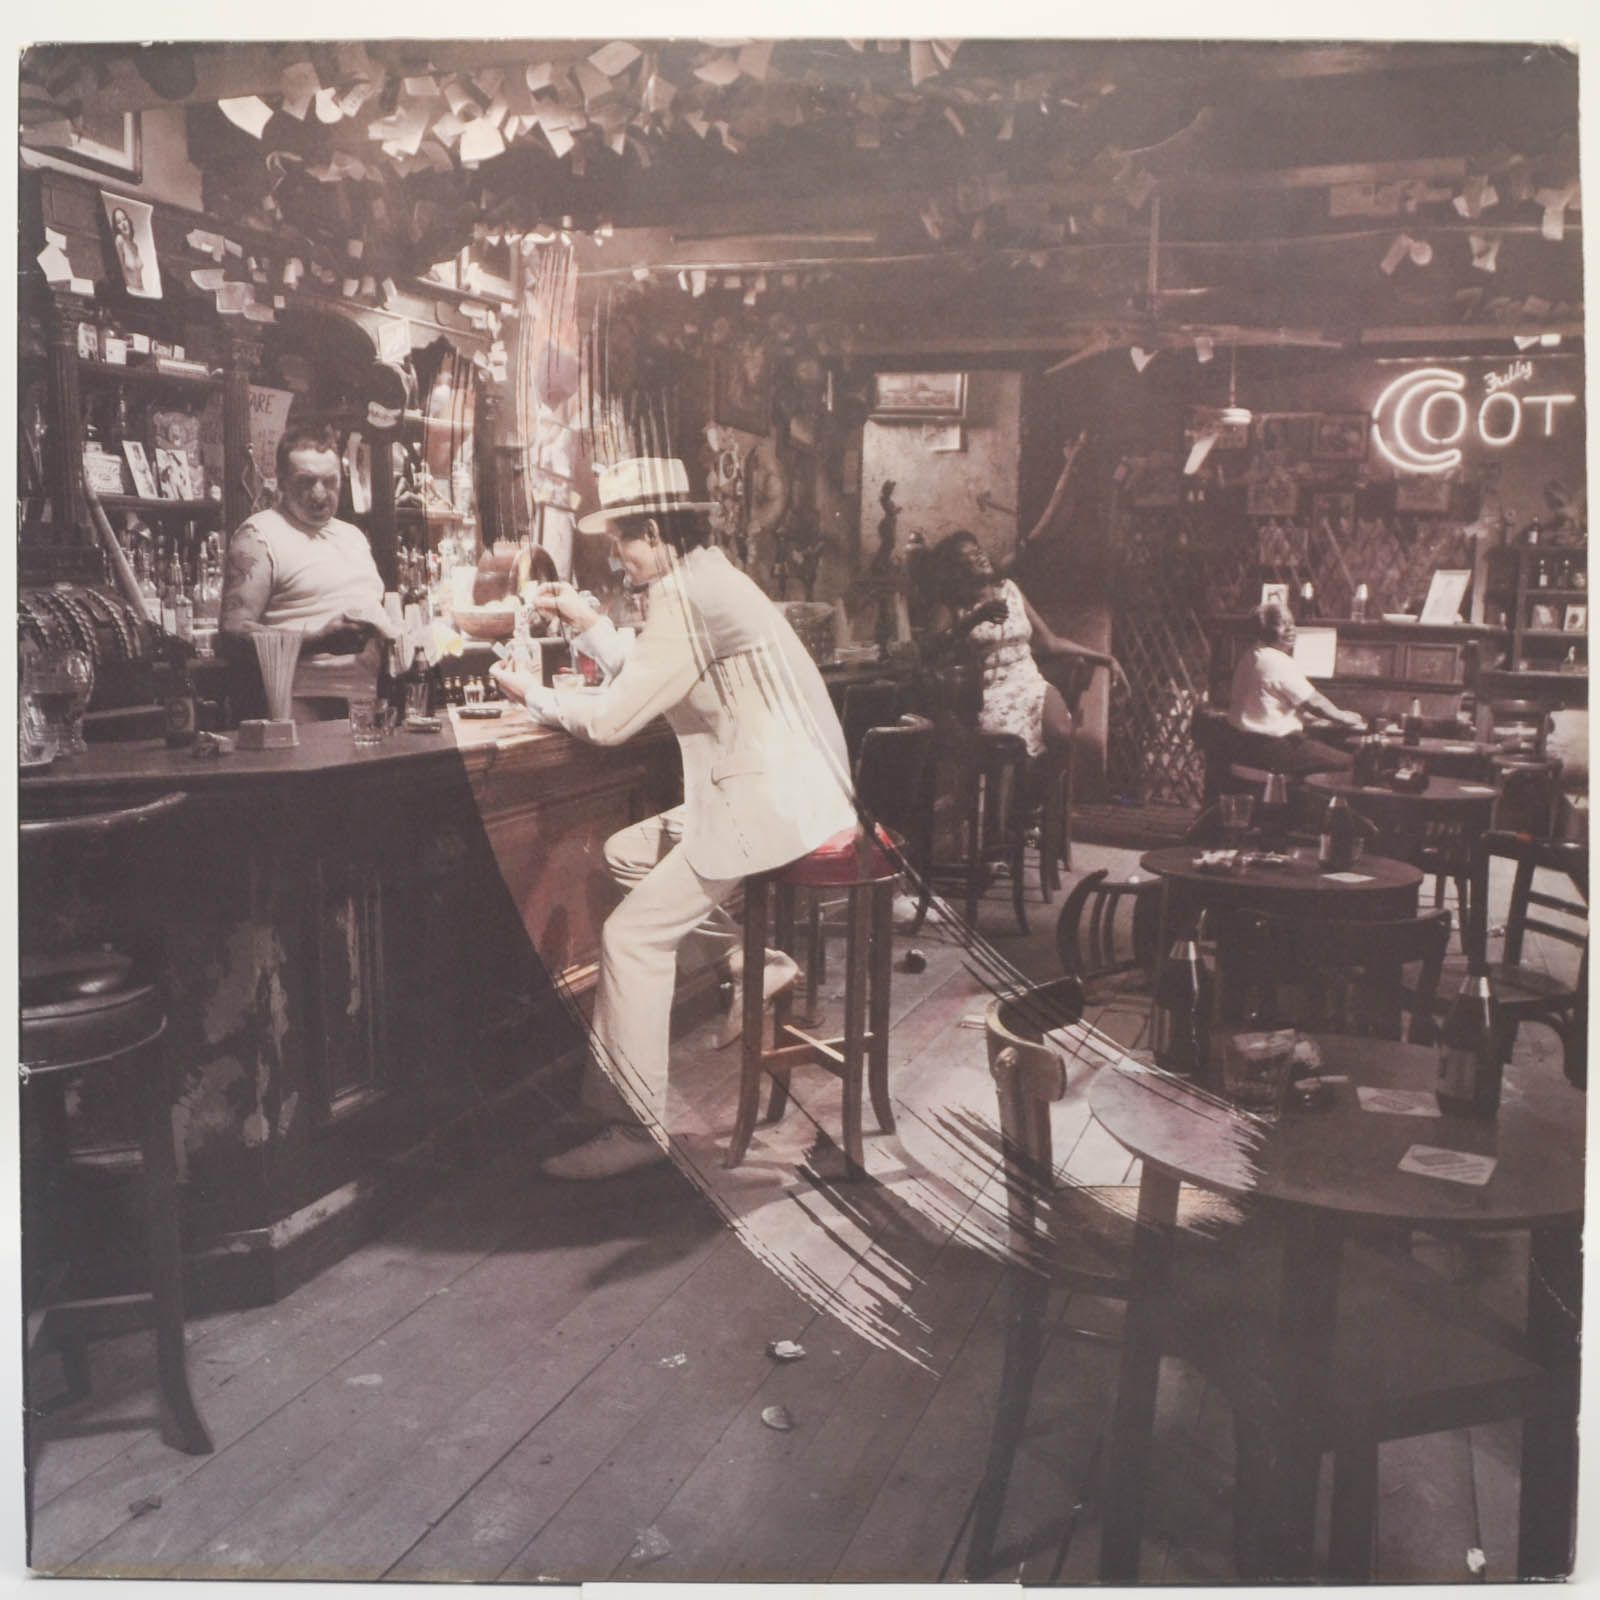 Led Zeppelin — In Through The Out Door, 1979